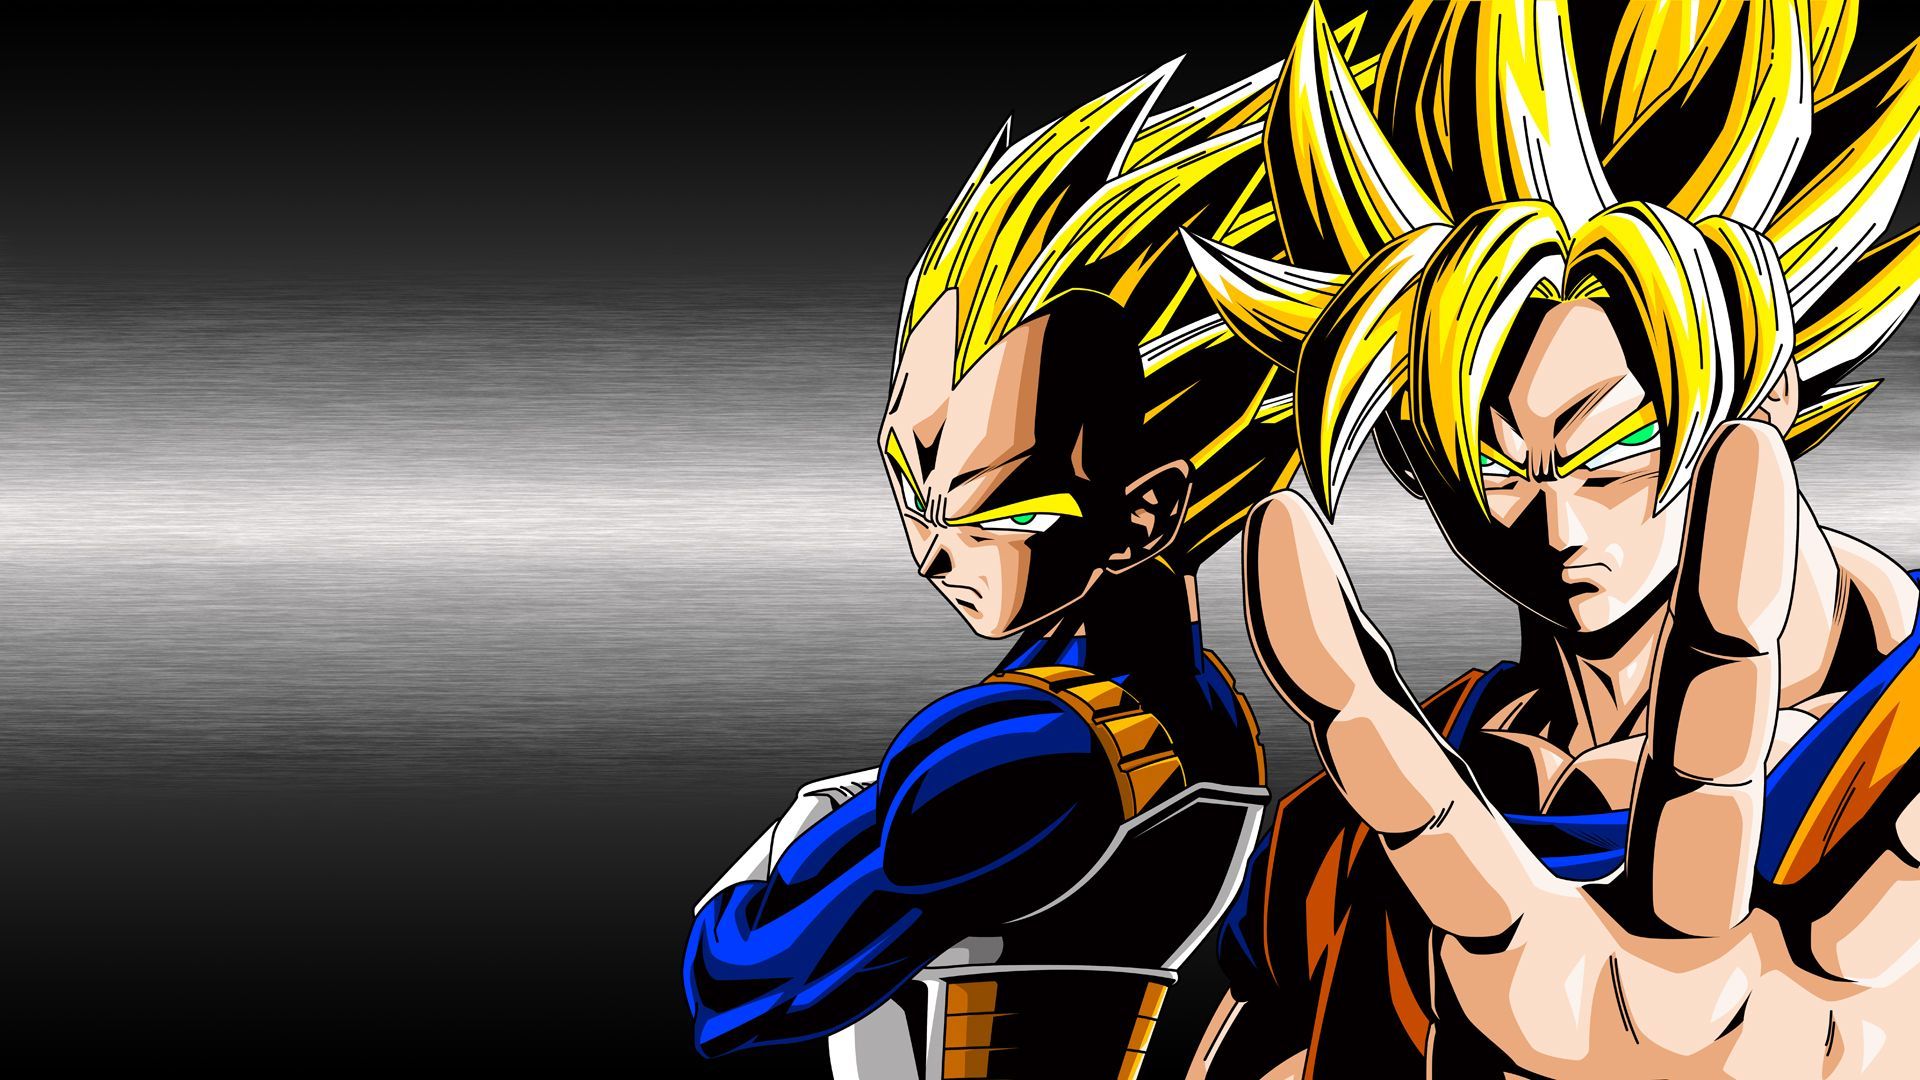 Dbz Wallpapers HD Gohan 71 images